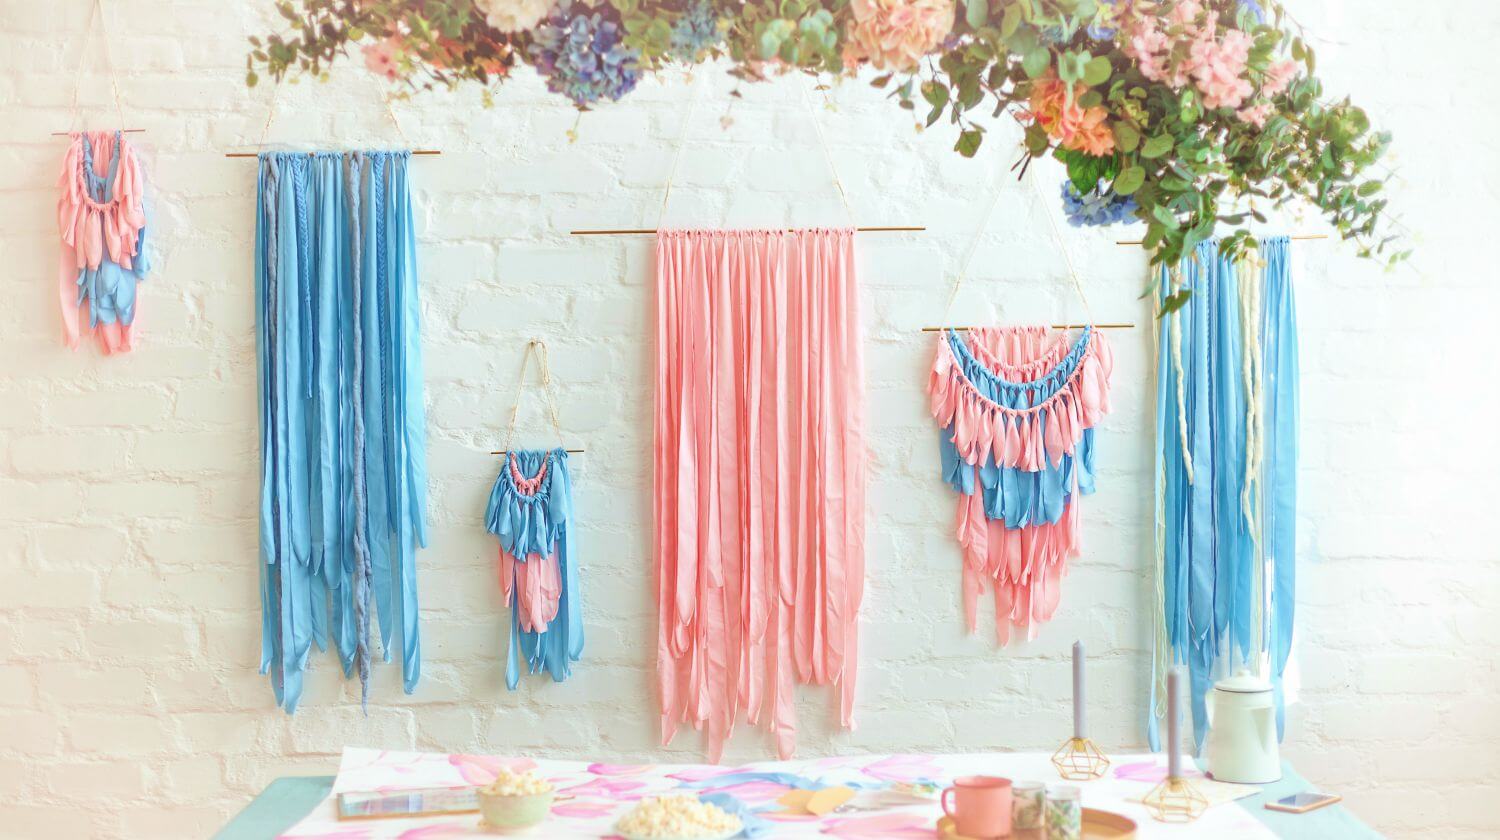 How to make a macrame wall hanging